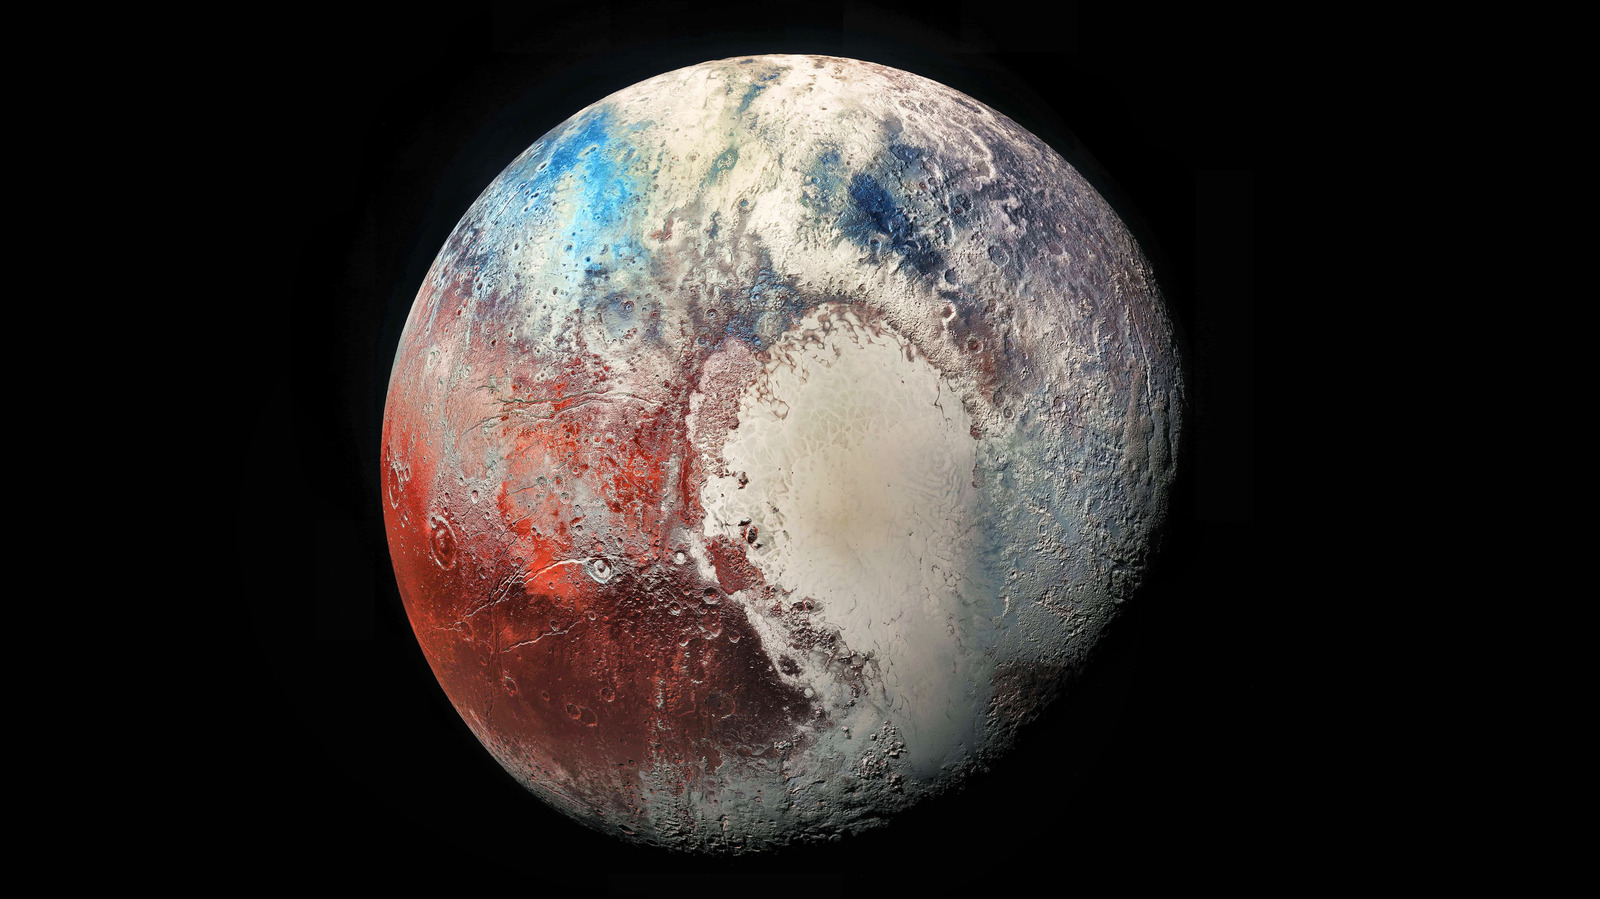 Why Is Pluto No Longer Considered a Planet?